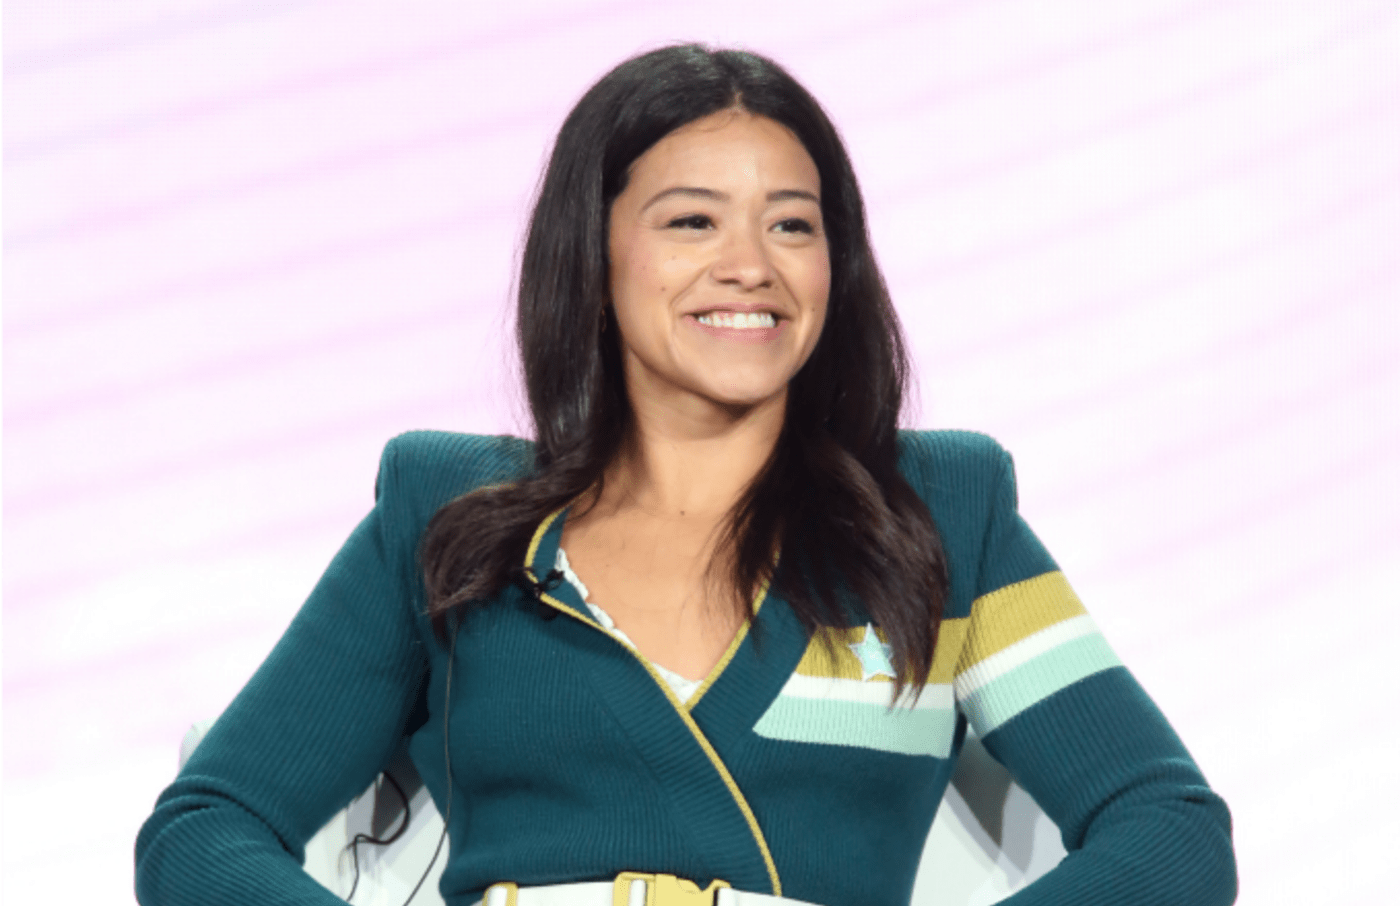 Gina Rodriguez of the television show 'Jane the Virgin' speaks